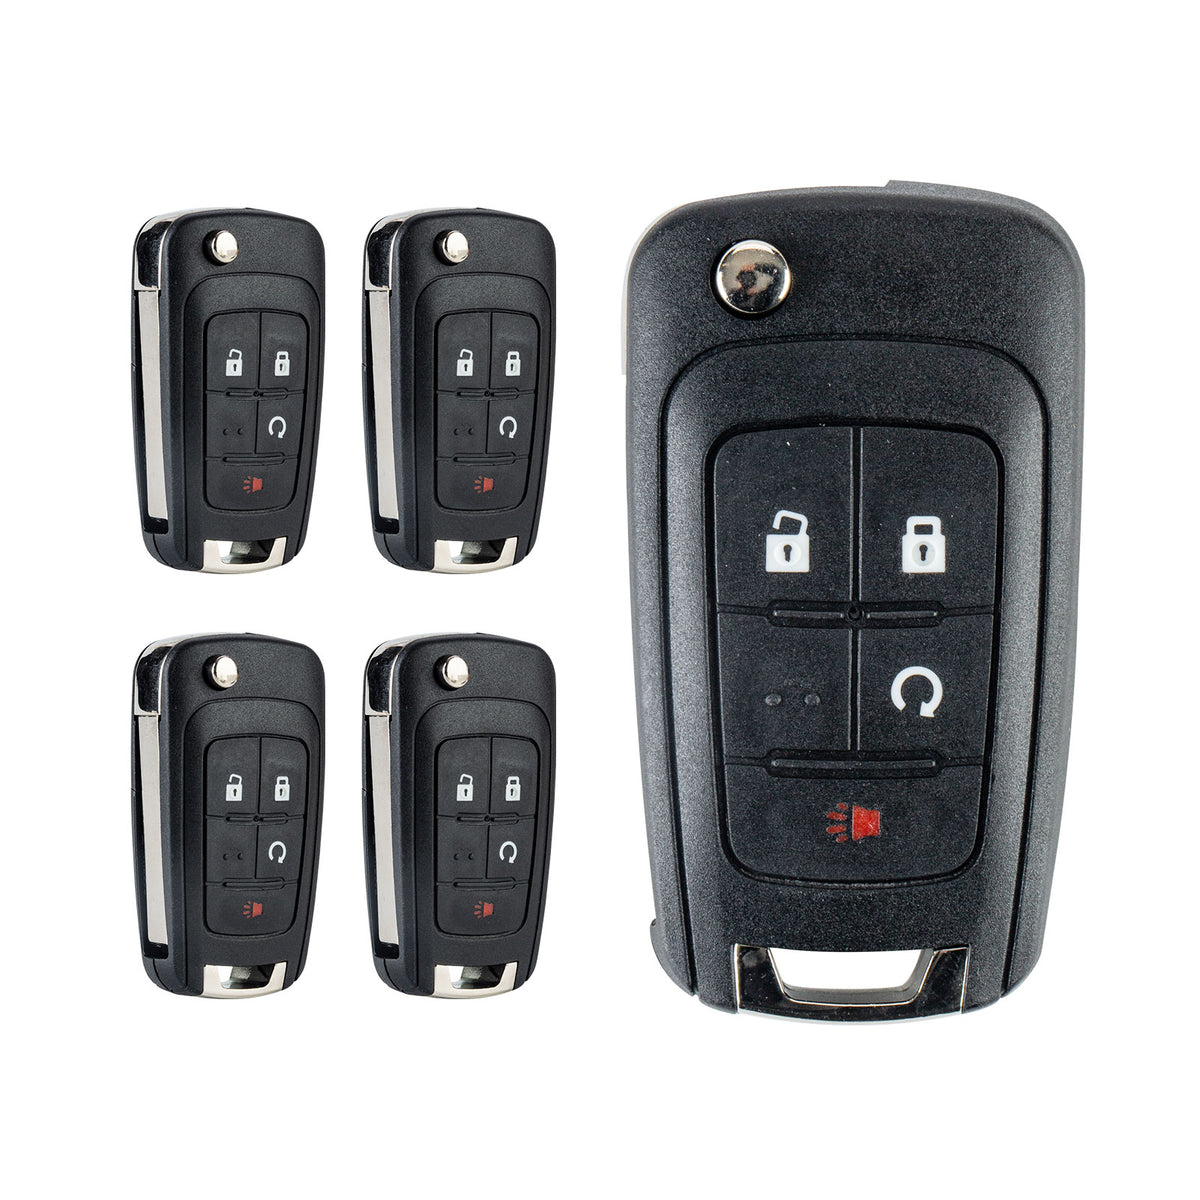 Car Key Fob Keyless Entry Remote Control 315MHZ Replacememnt for 2010-2019 Equinox 2014-2018 Buick Encore 2010-2019 GMC Terrain OHT01060512 KR-C4SC-05